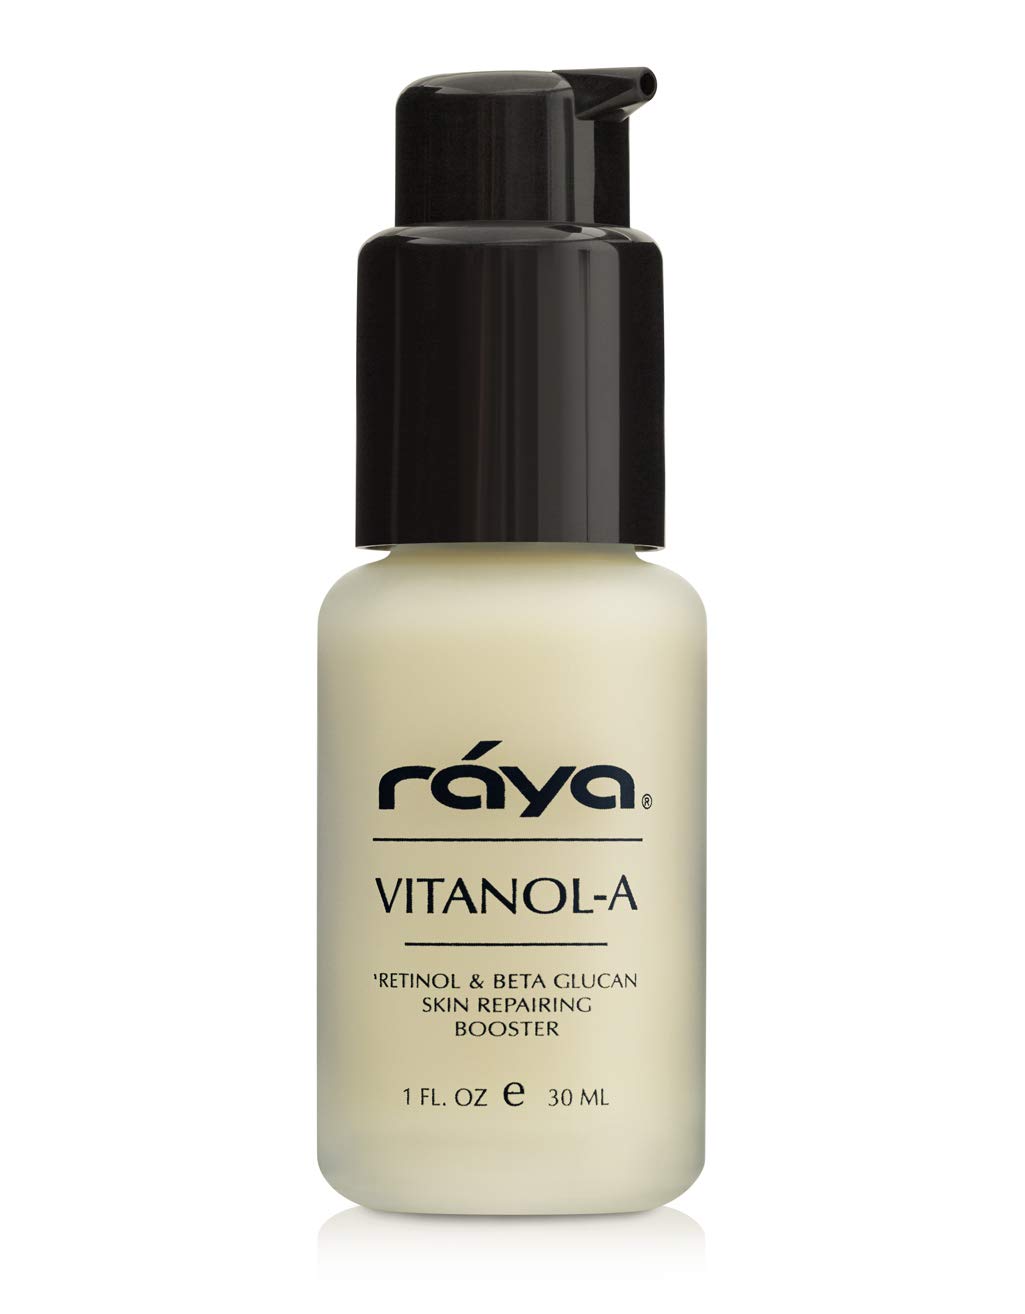 RAYA Vitanol-A Serum (501) | Retinol Facial Treatment for Oily Skin | Made with Vitamin-A | Smoothing, Refining, and Brightening